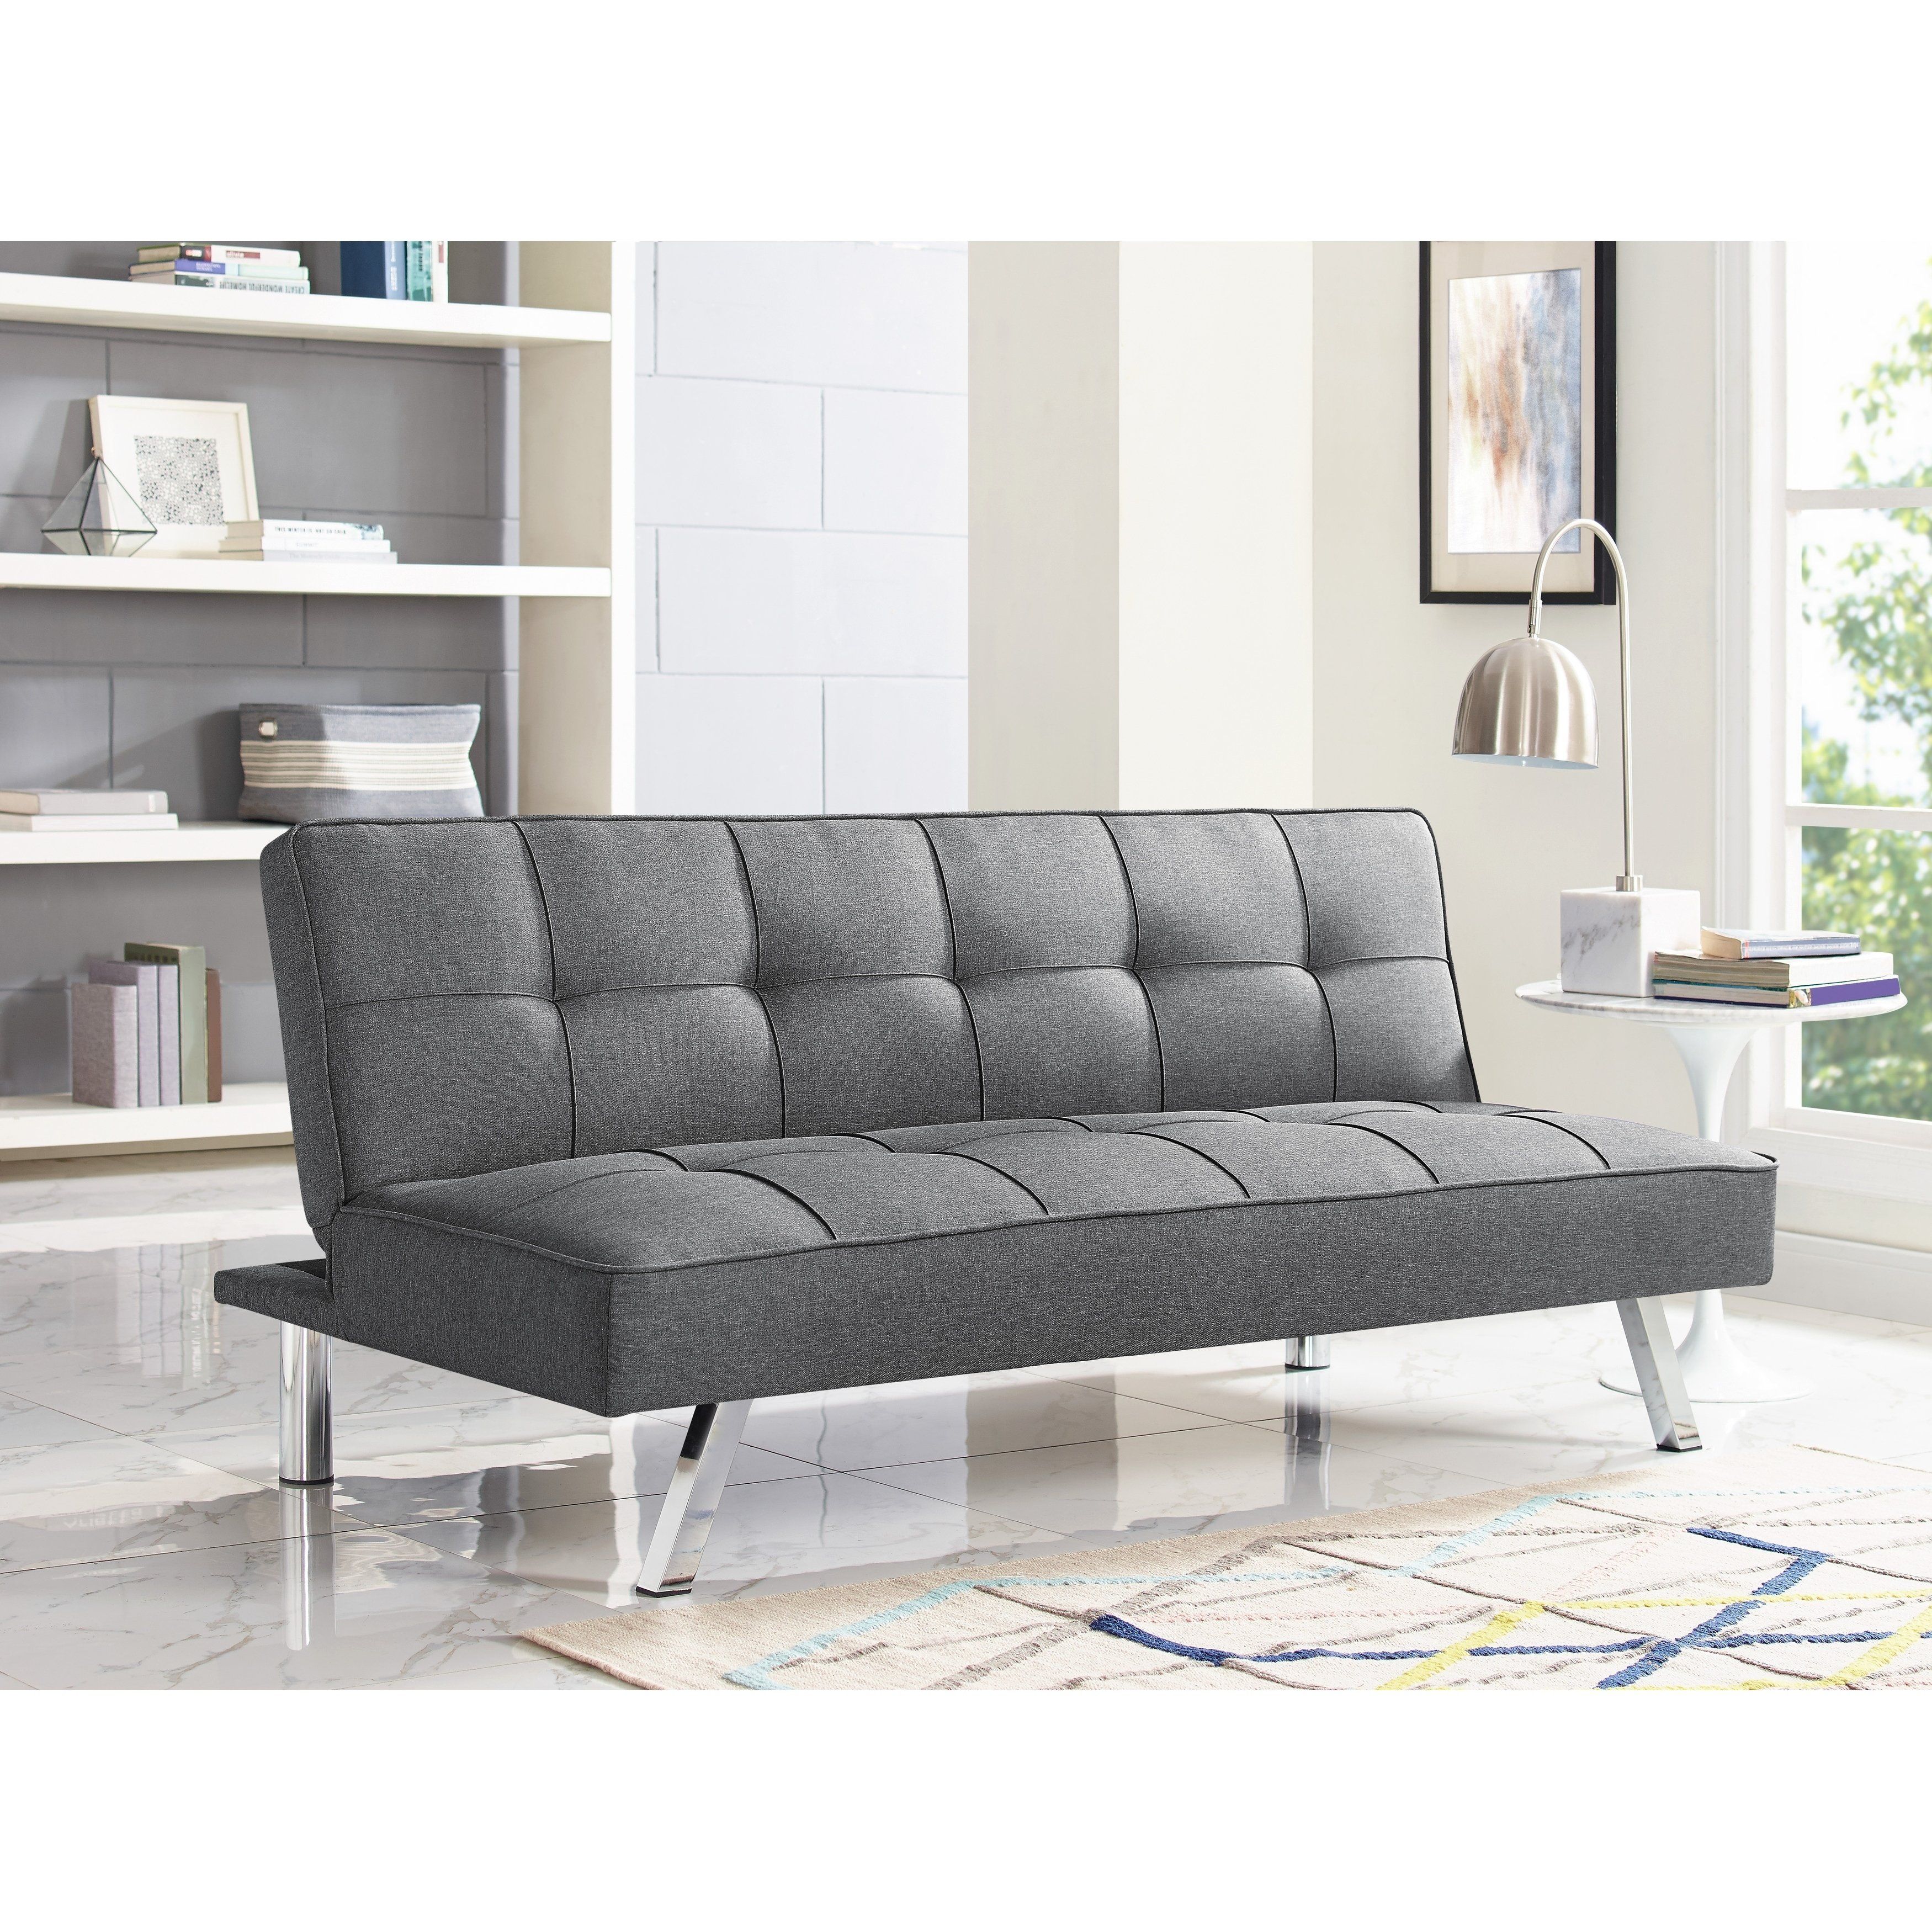 Shop Serta Charlie Tufted Grey Upholstered Convertible Sofa – Free With Cohen Foam Oversized Sofa Chairs (View 7 of 20)